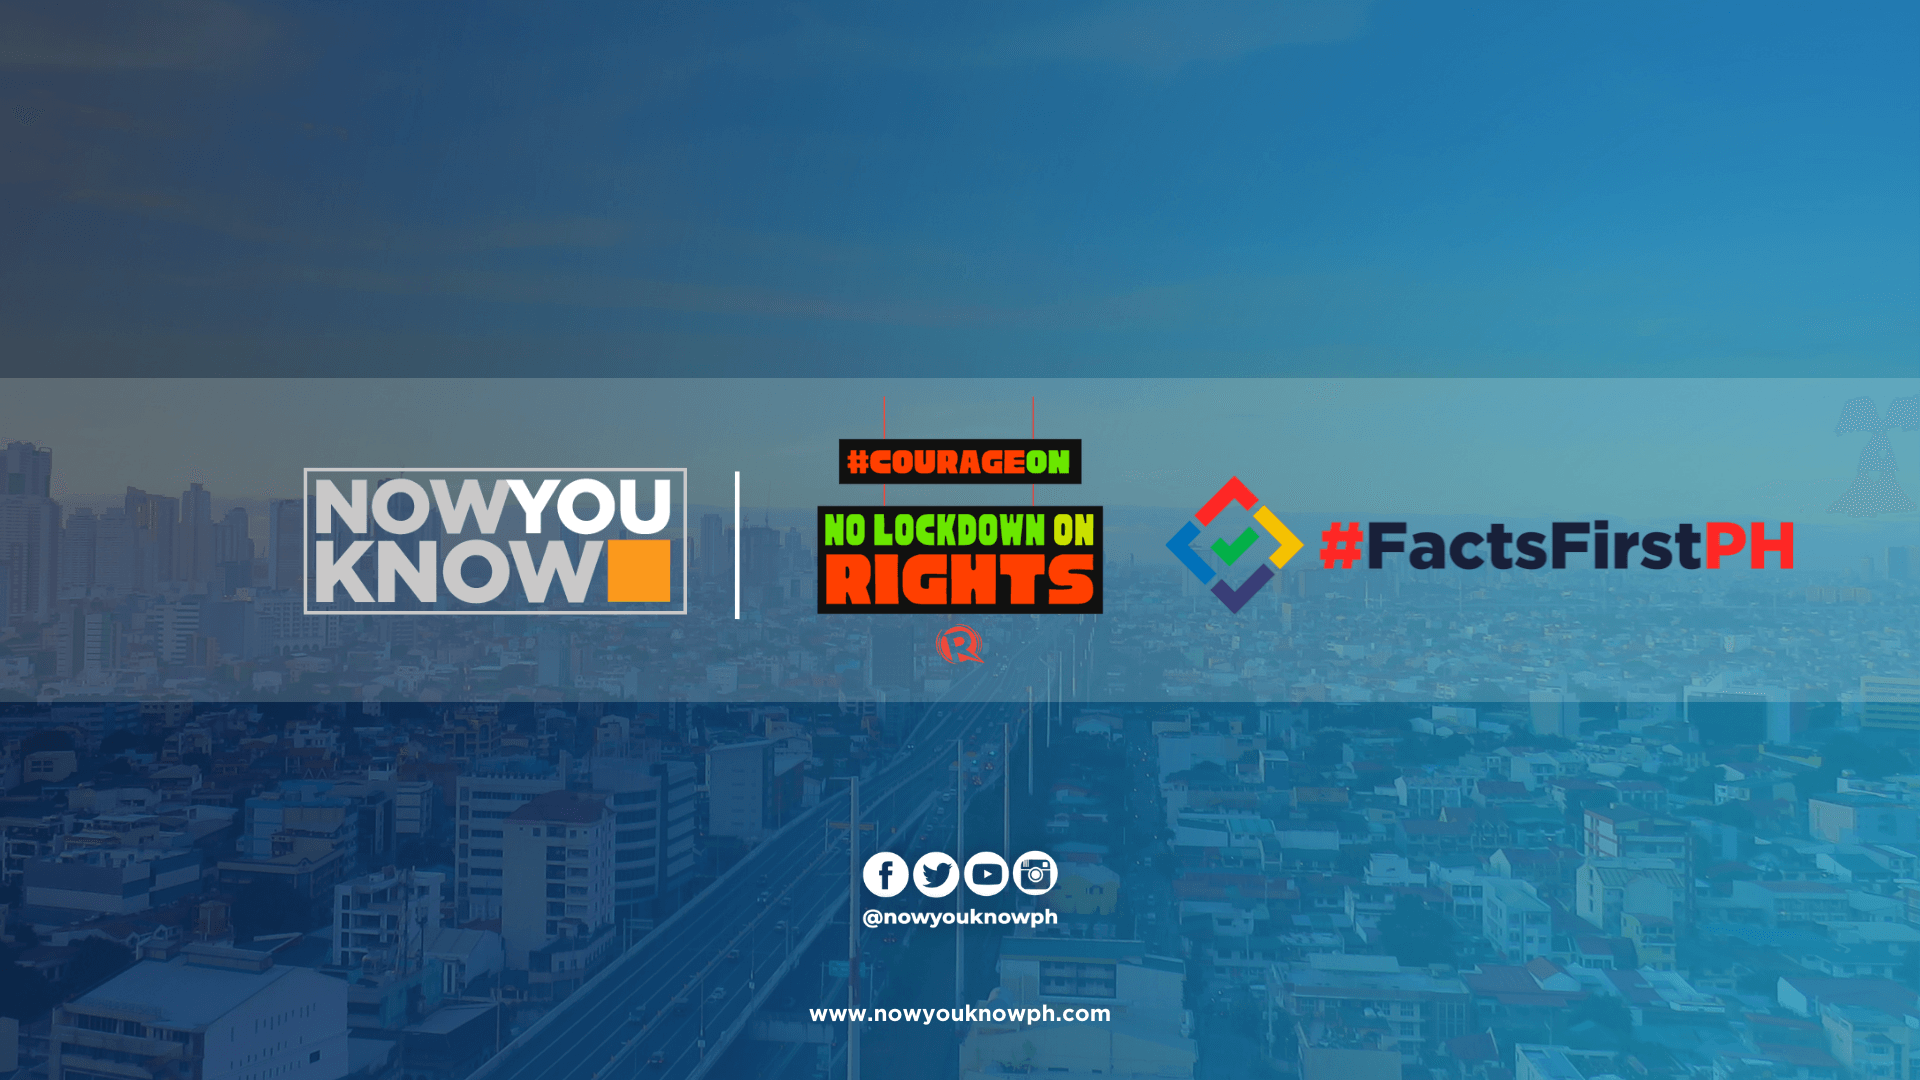 Now You Know PH and Rappler’s Lighthouse Communities of Action aim to amplify facts with new platform